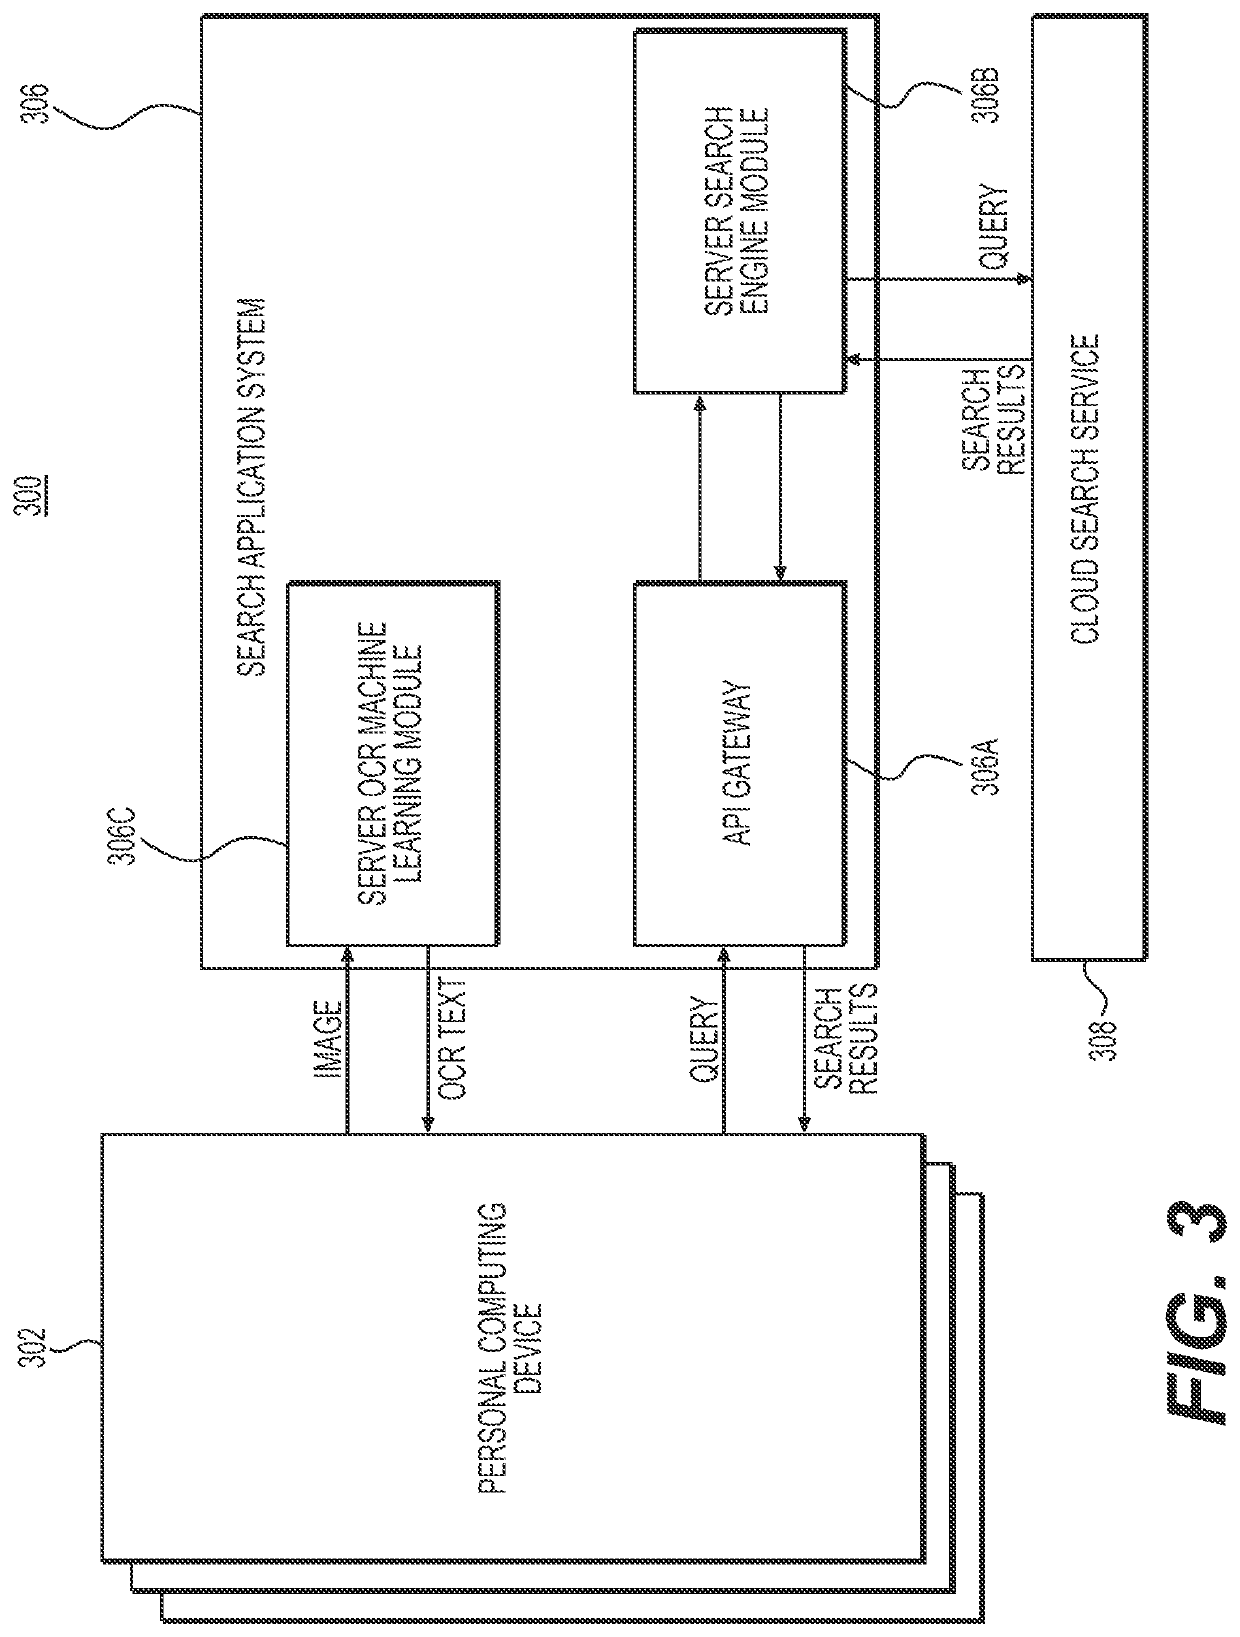 Systems and methods for generating search results based on optical character recognition techniques and machine-encoded text